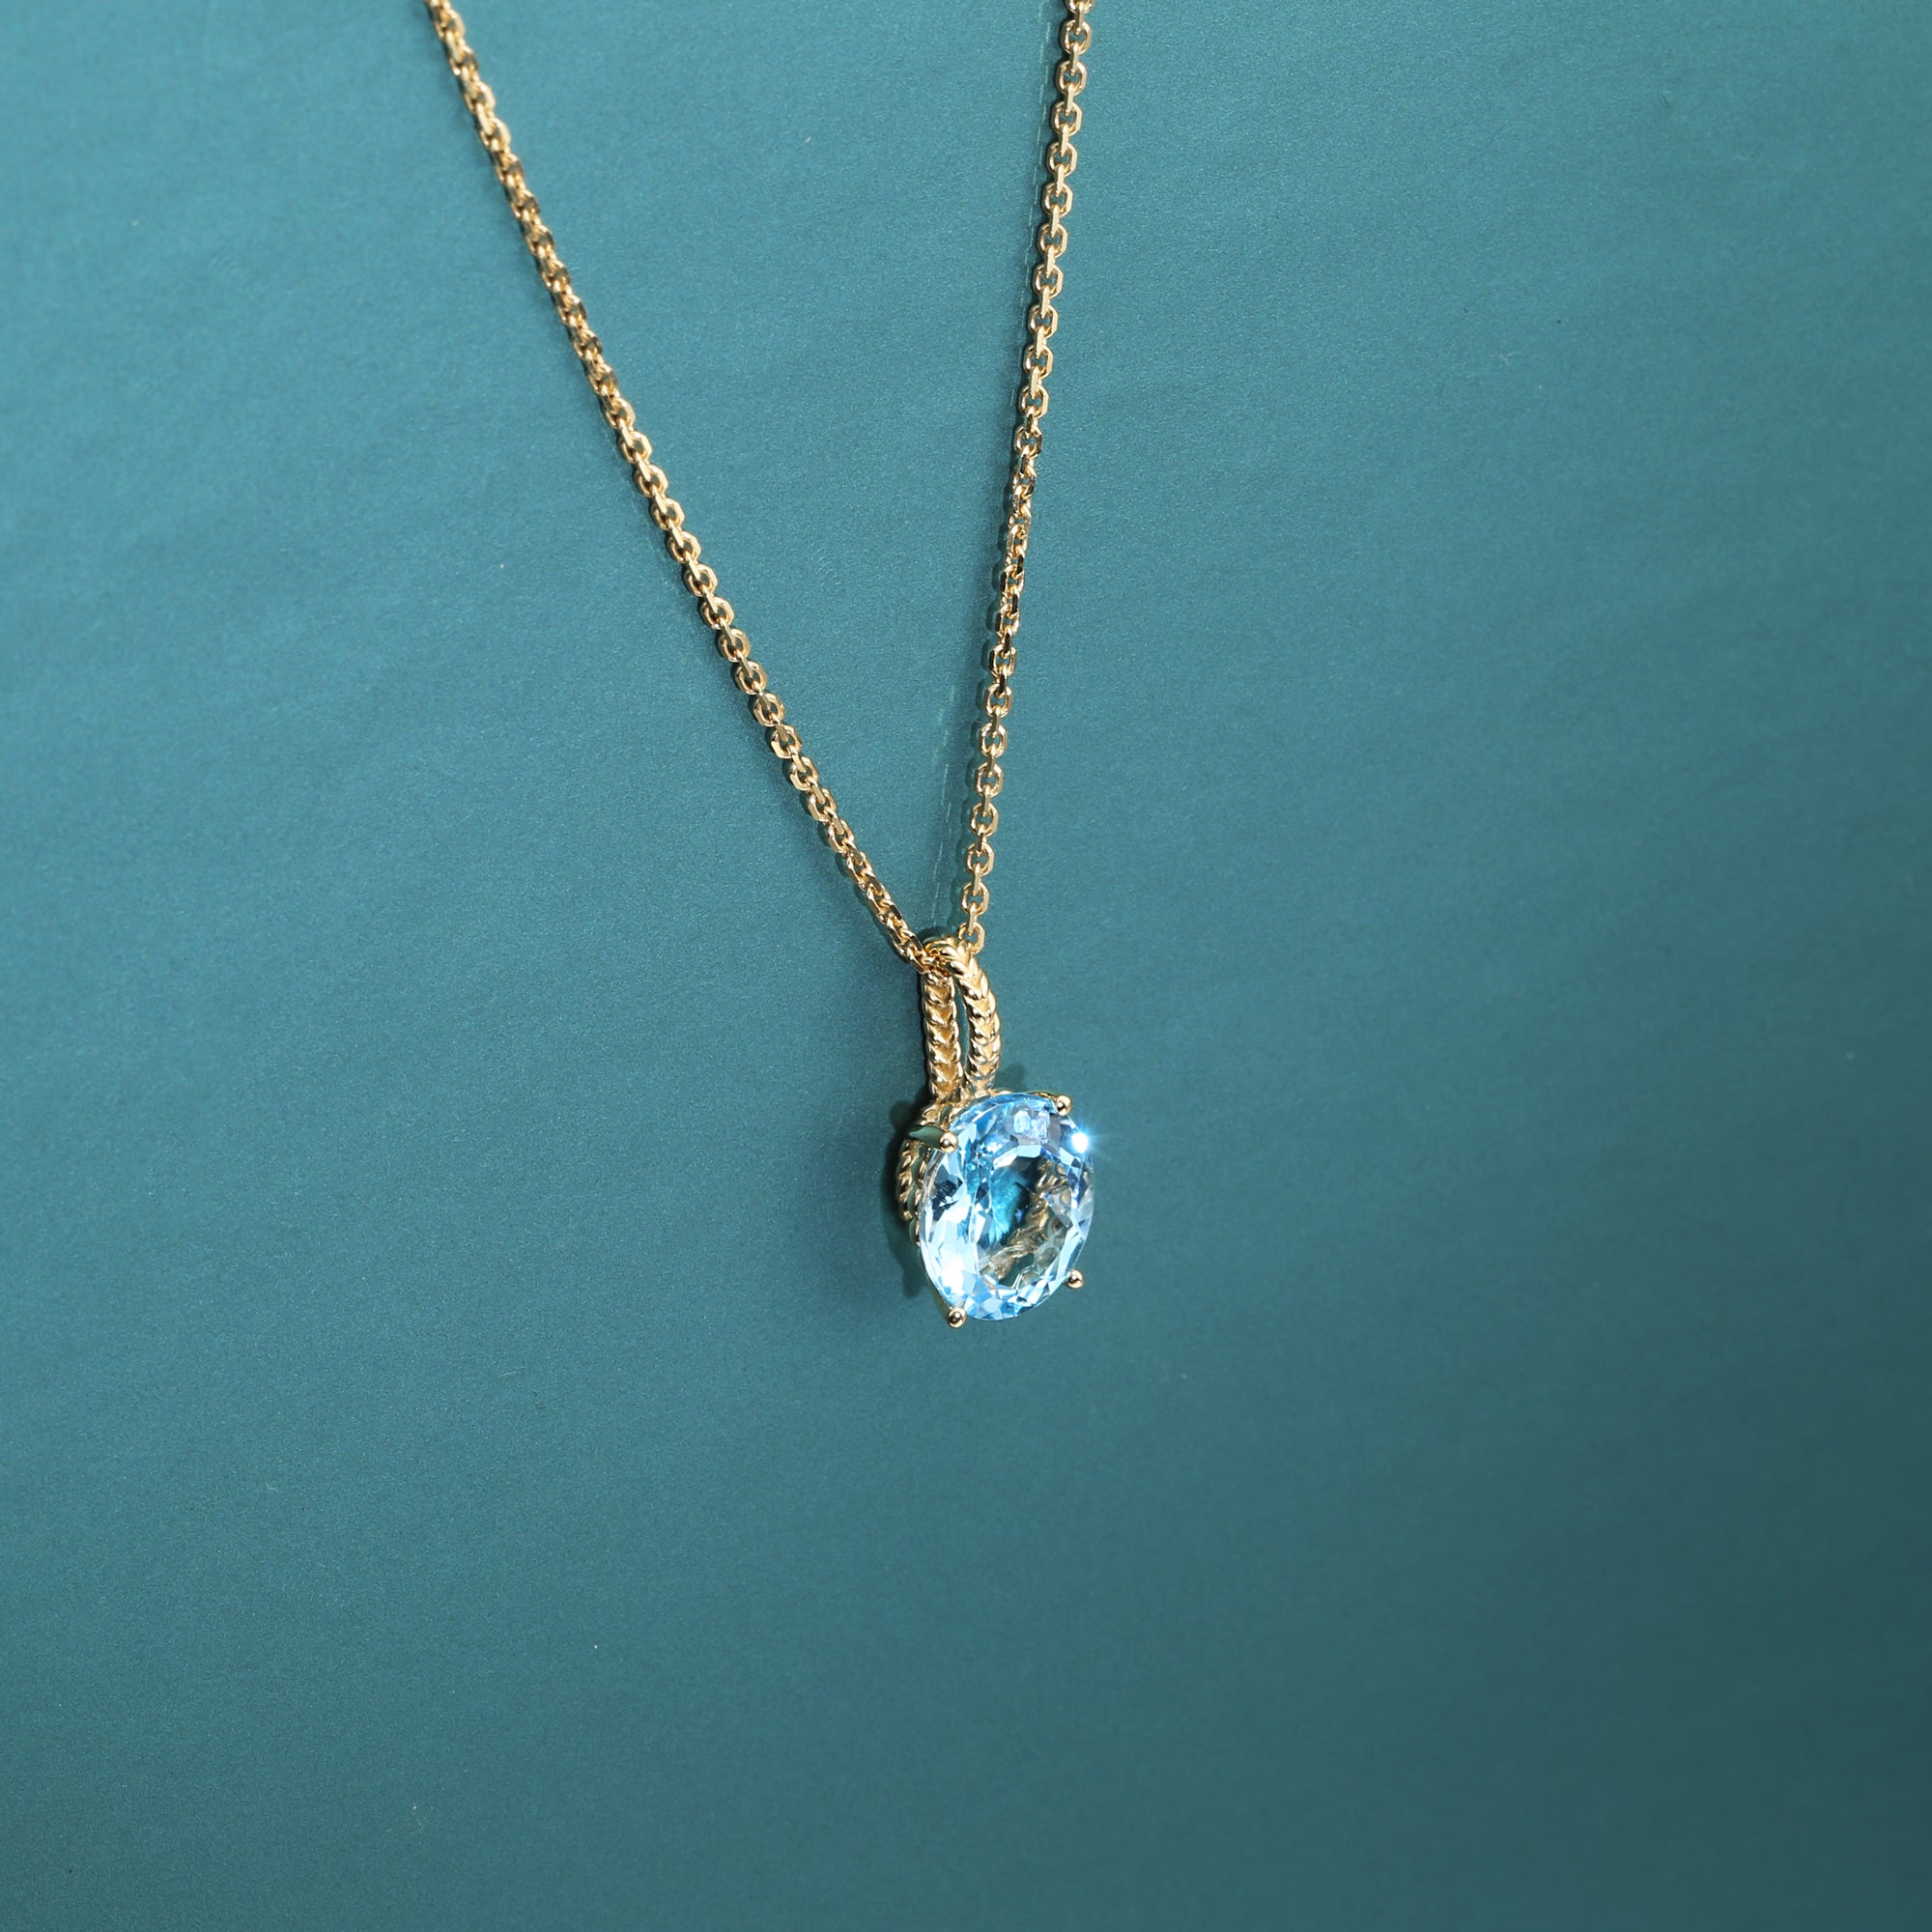 Stunning London Blue Topaz Pendants for Sale | Discover the Intense  Gemstone Beauty – Anakha